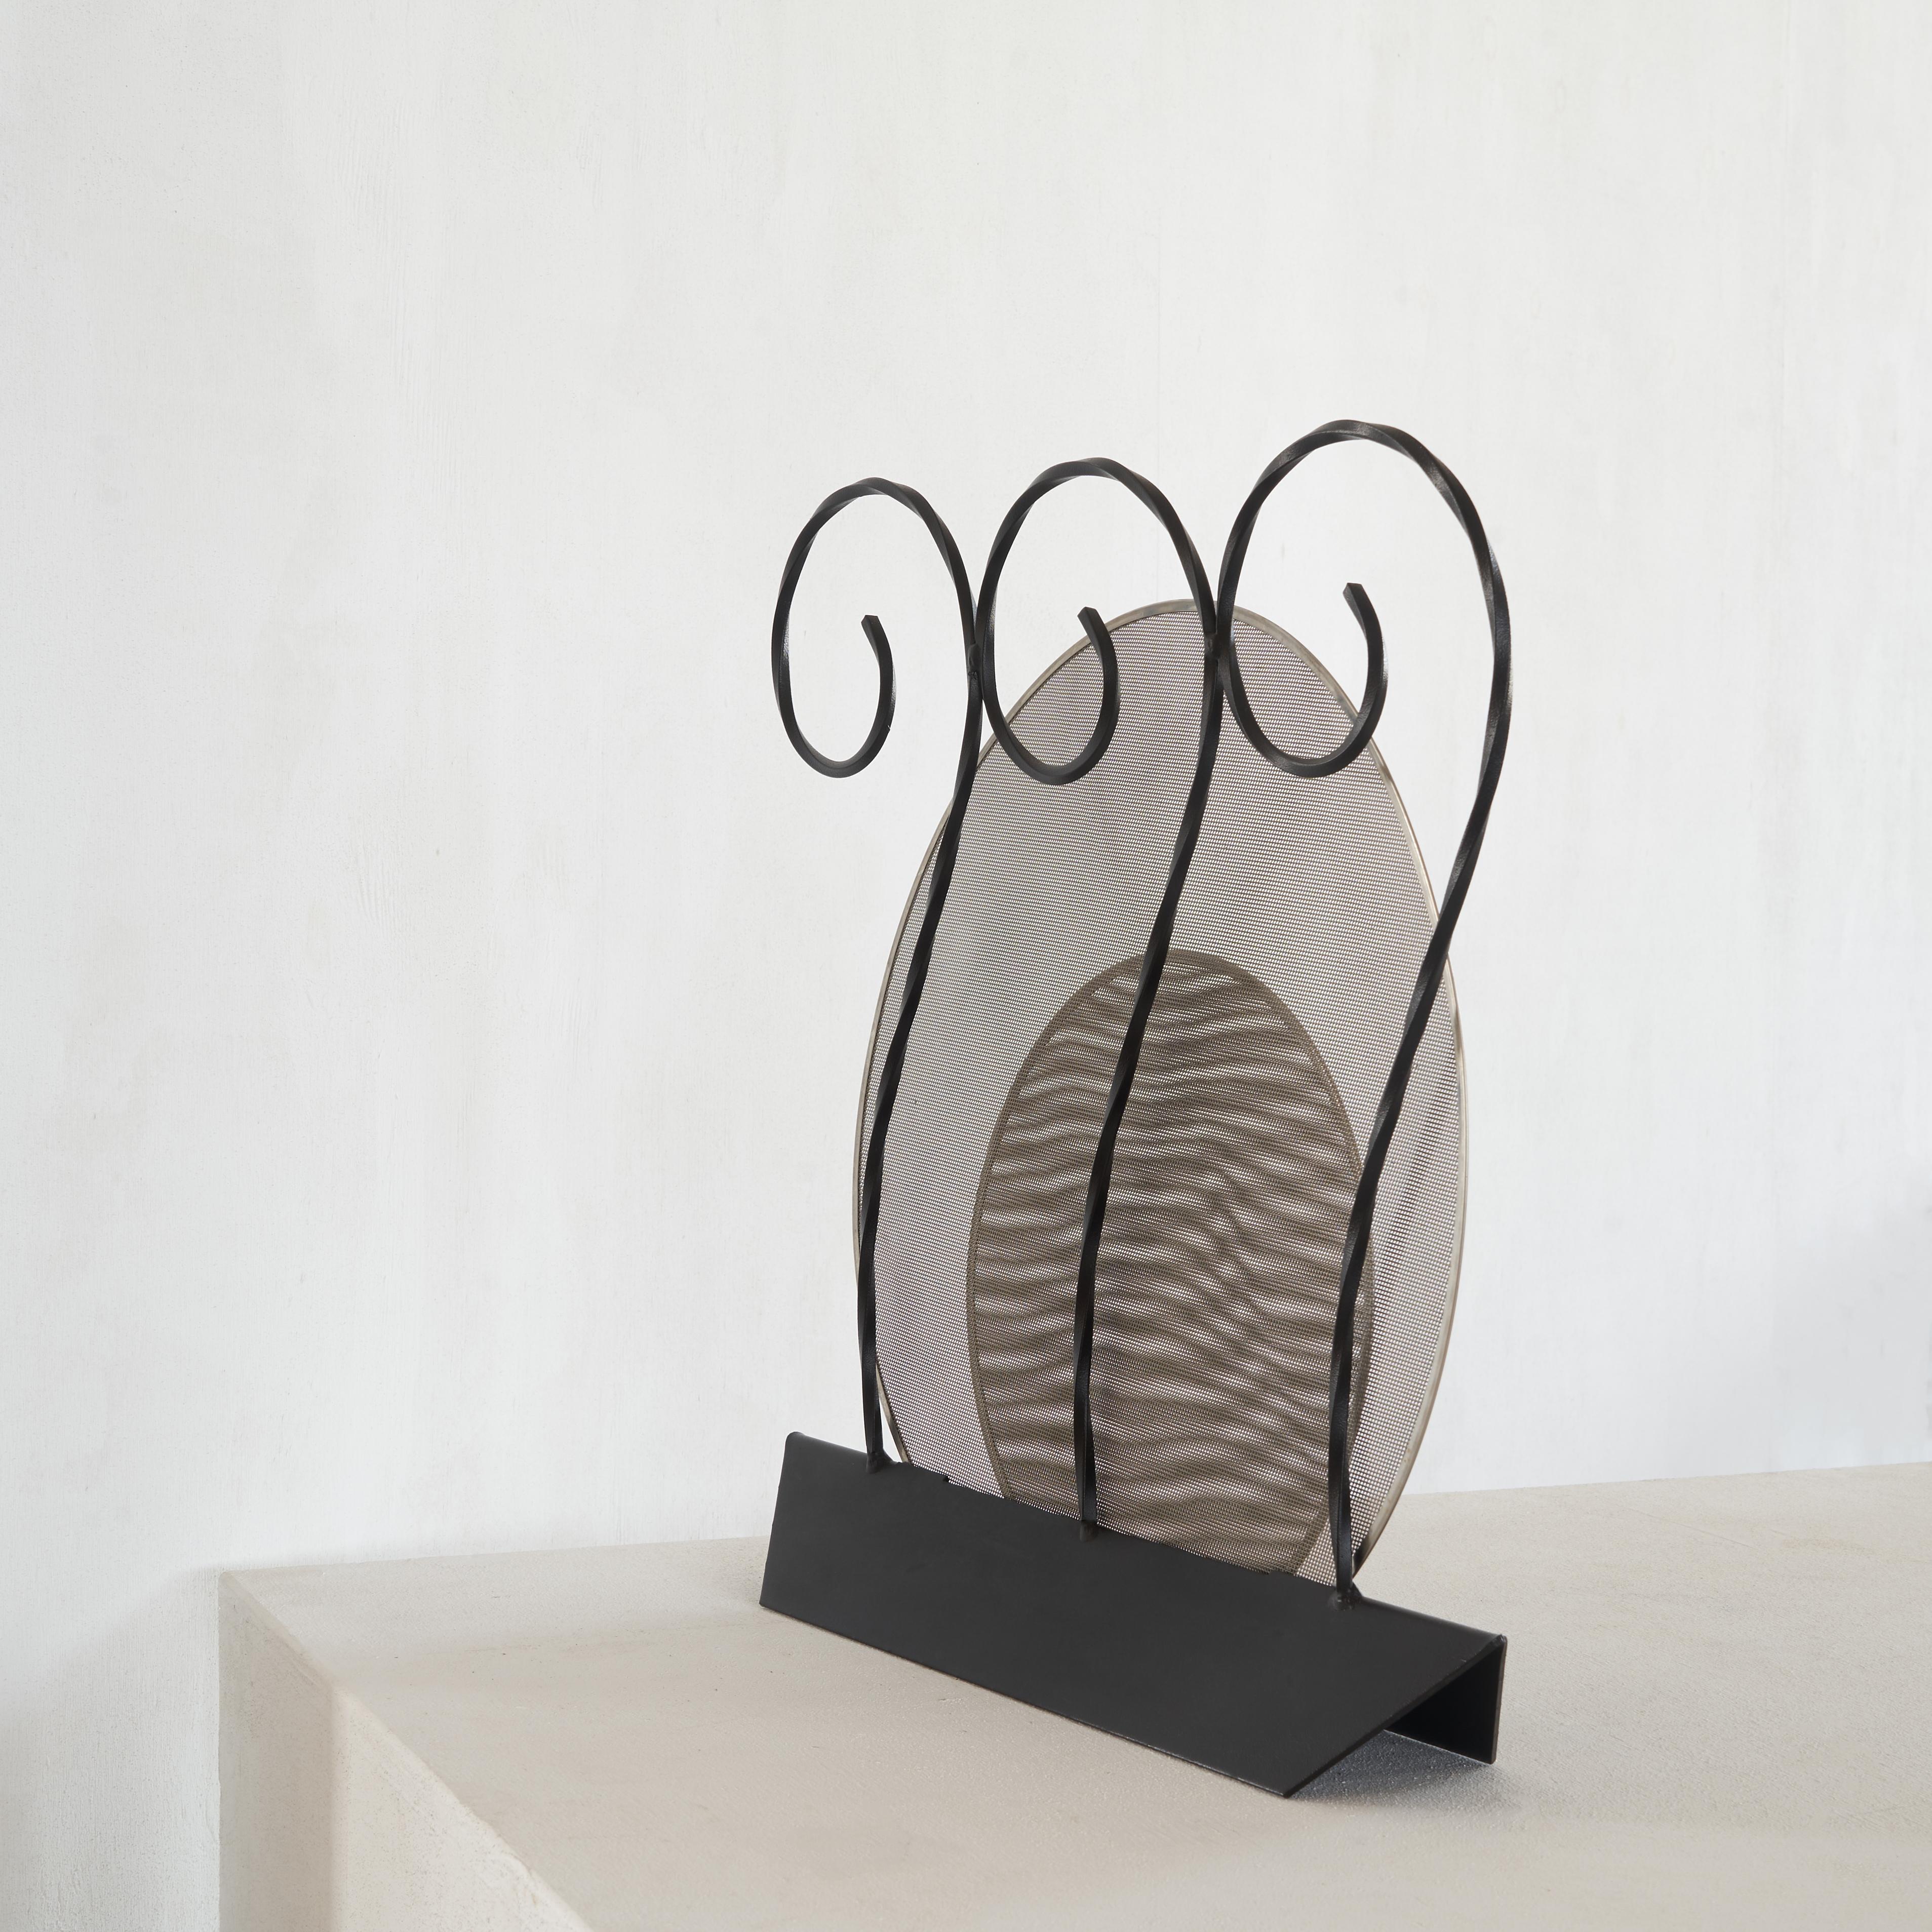 Hand-Crafted Dimensione Fuoco Set of Scarpa Leather Log Basket & Riccardo Dalisi Fire Screen